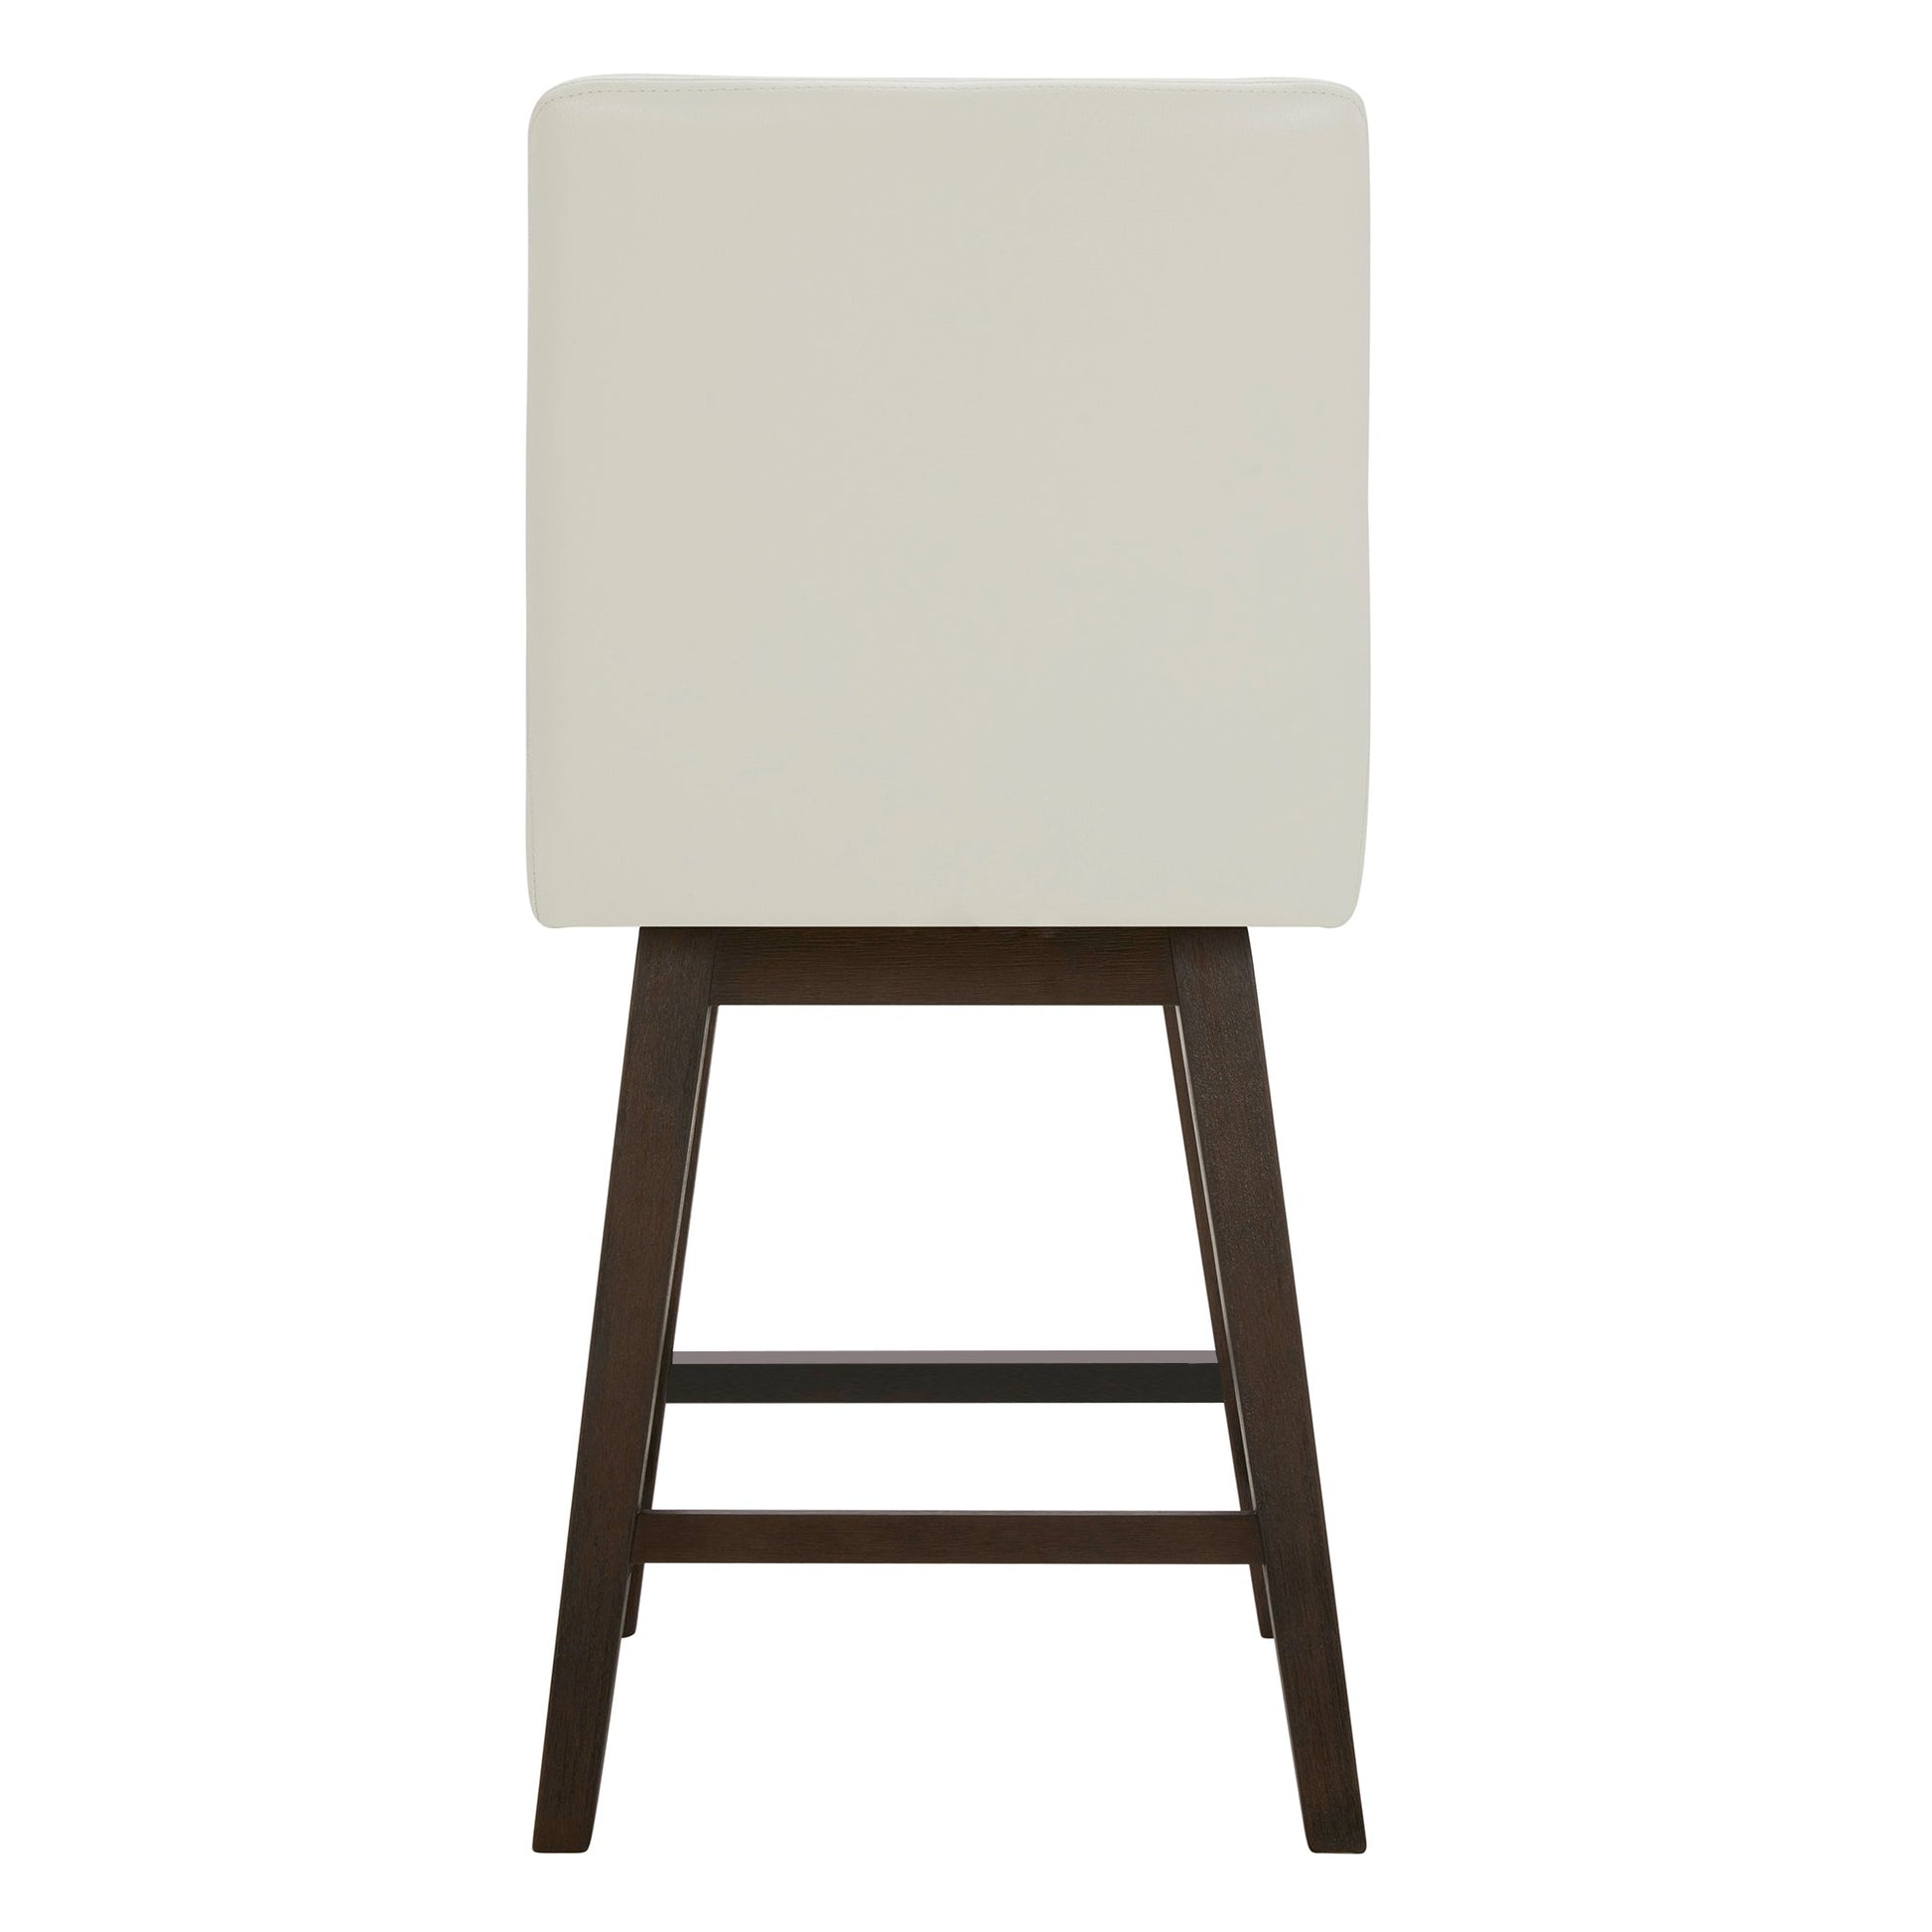 CHITA LIVING-Lissa Swivel Counter Stool 26.8''-Counter Stools-Faux Leather-White-